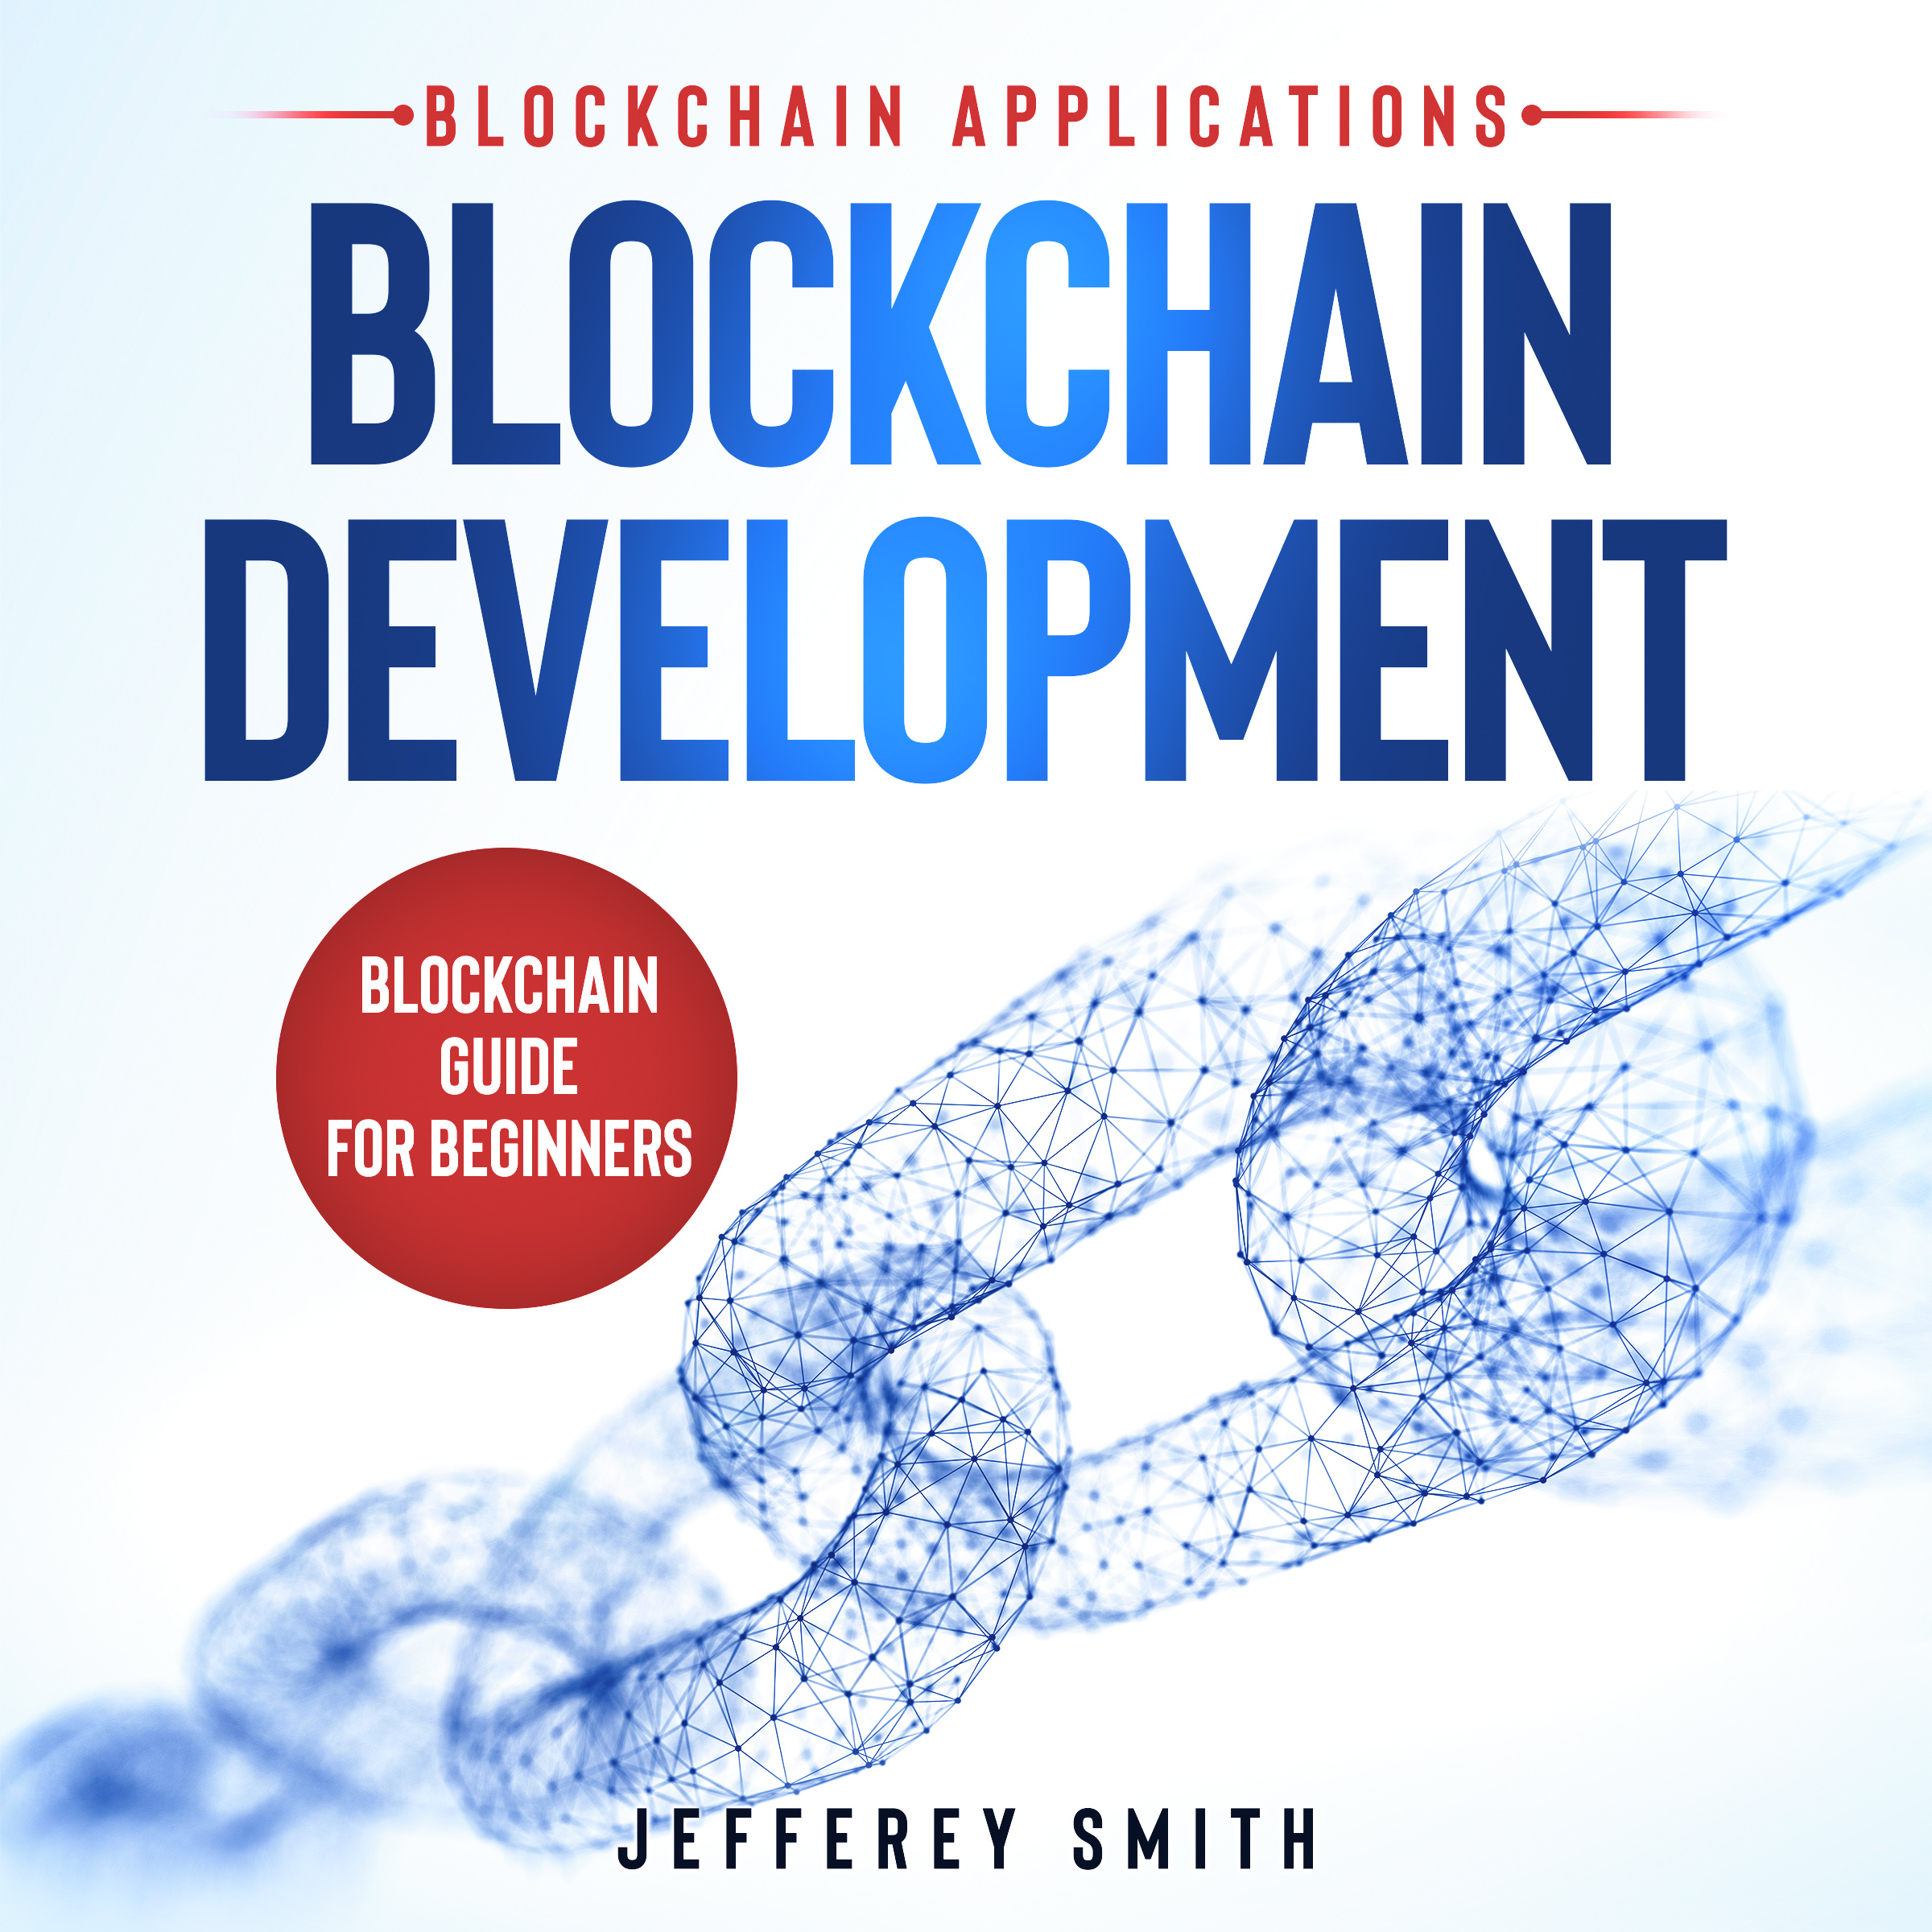 FREE: Blockchain Development – Blockchain Applications!: Blockchain Guide for Beginners! Discover What You Need To Know! by Jefferey Smith